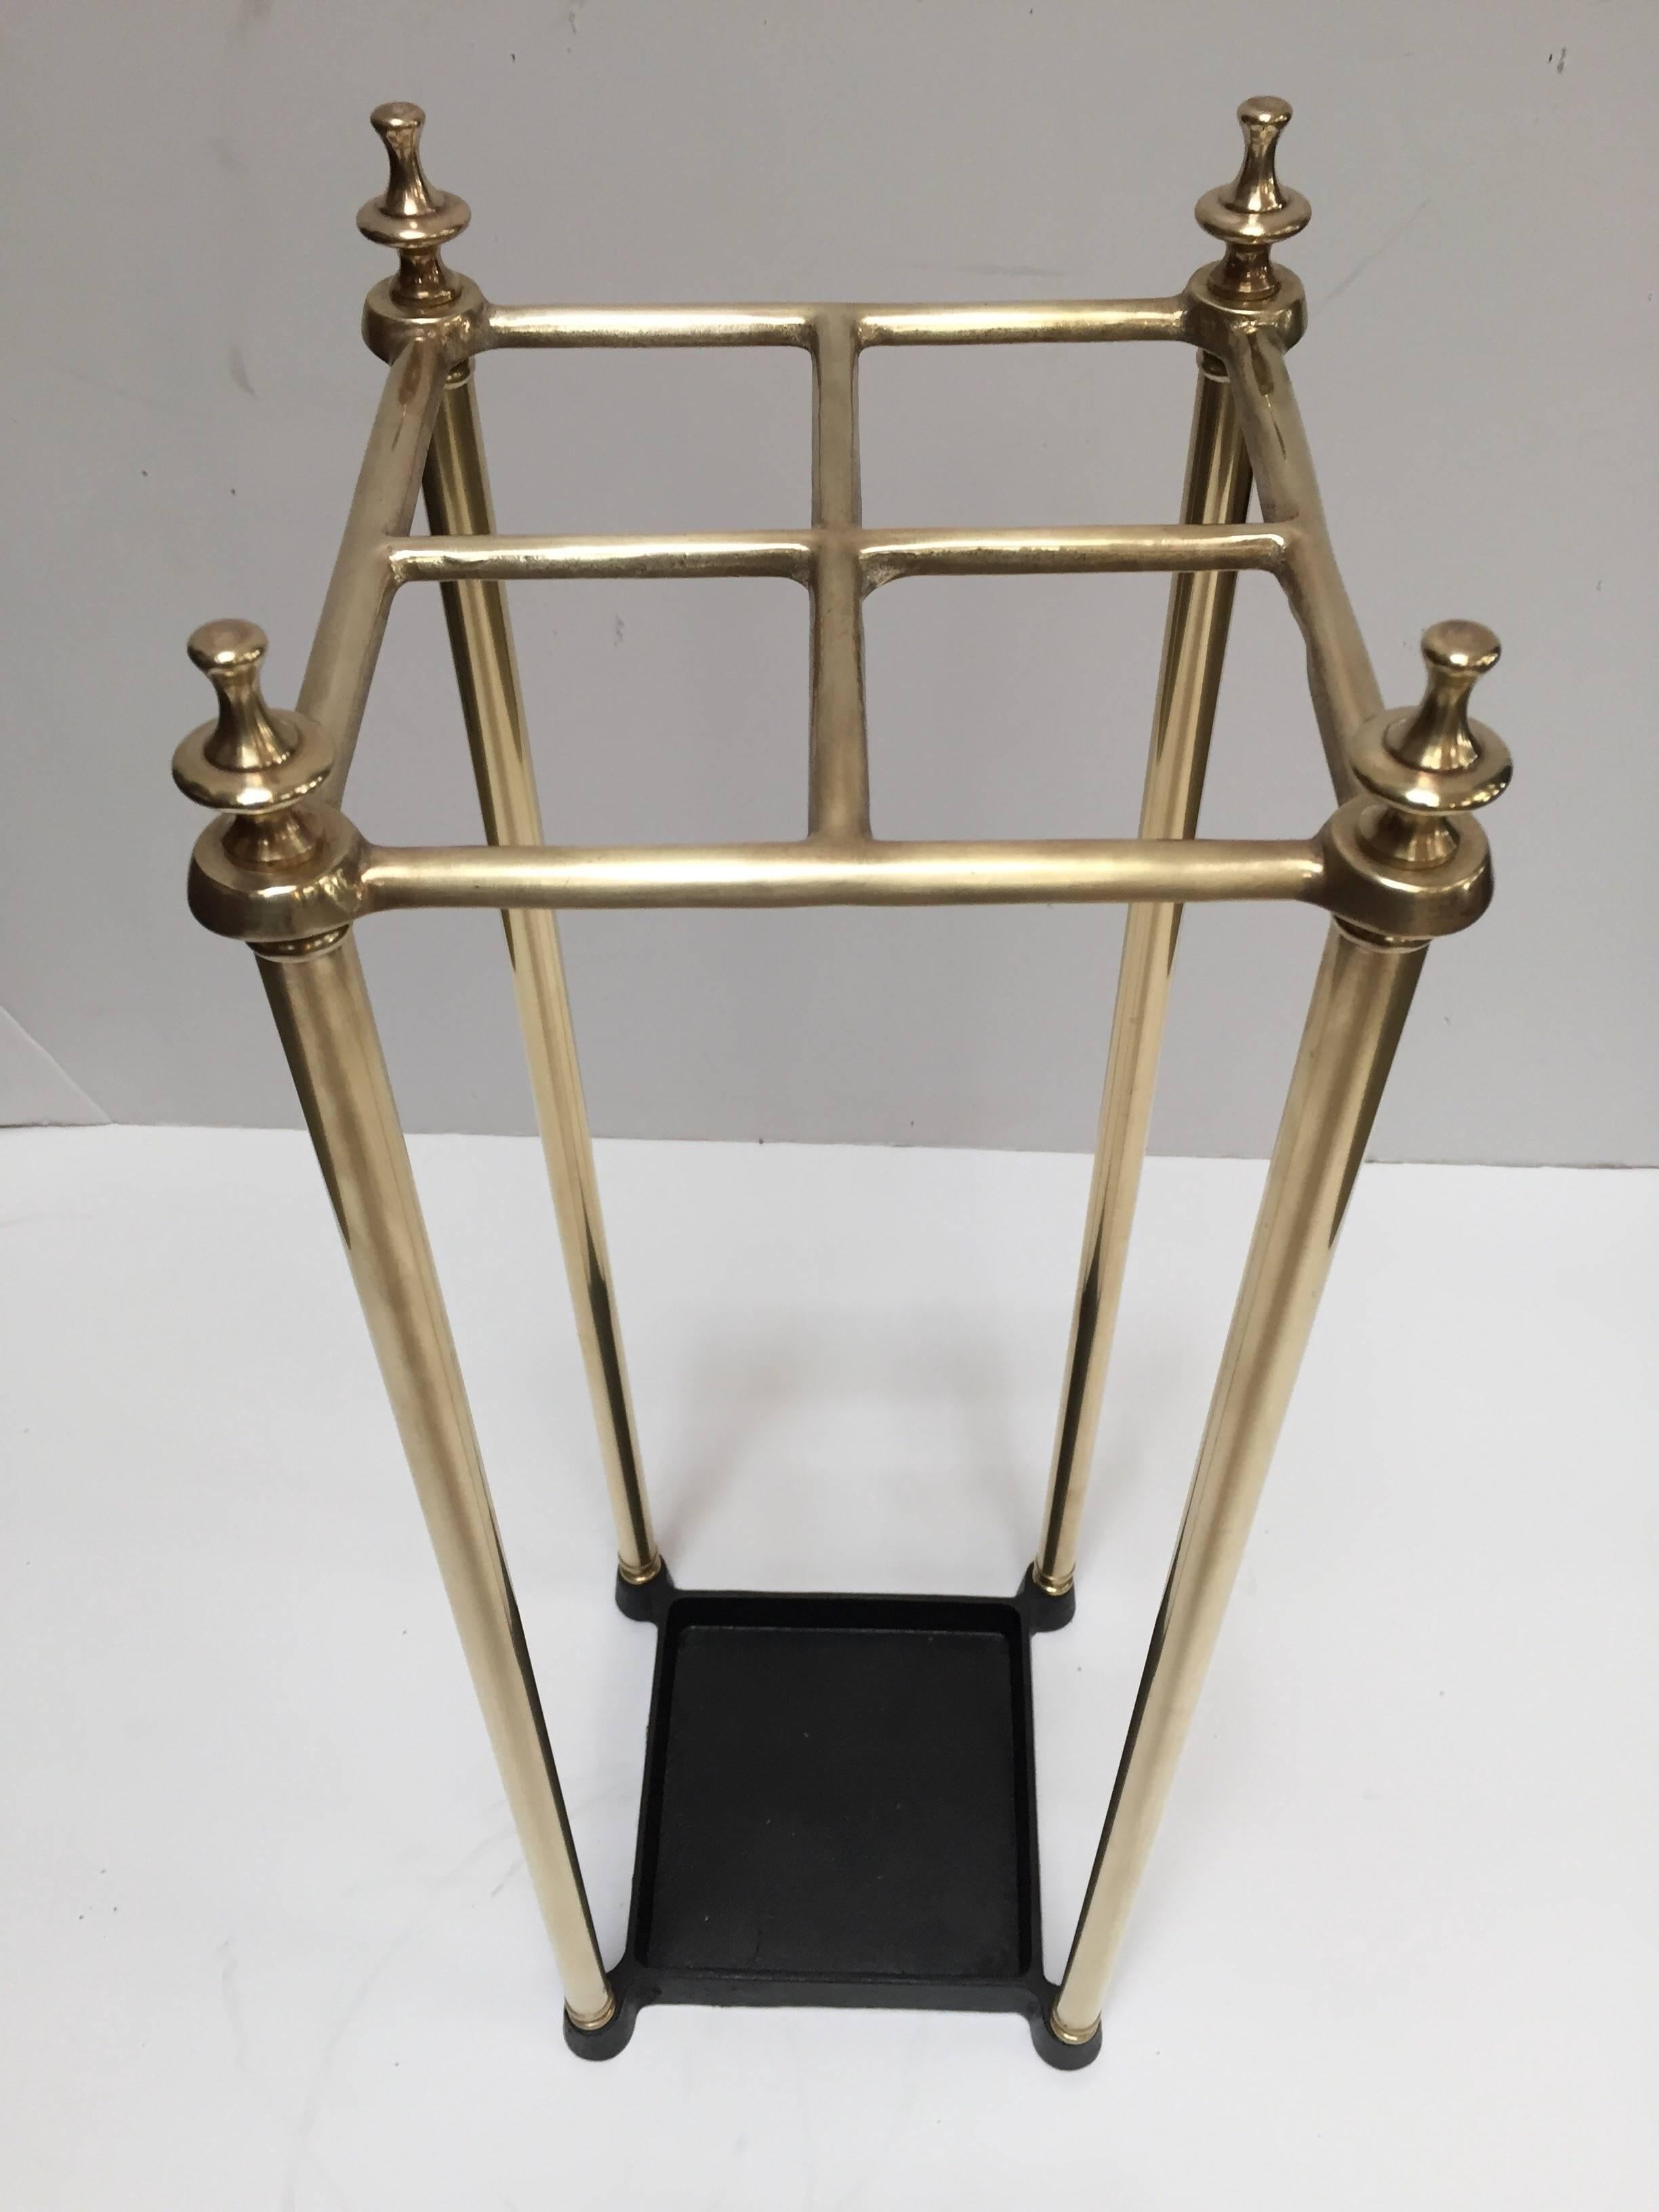 Victorian brass umbrella stand or stick stand.
Polished brass top divided into four sections to hold either walking sticks or umbrellas.
Square umbrella brass valet rack with four sections and black iron tray and supported upon a tubular frame